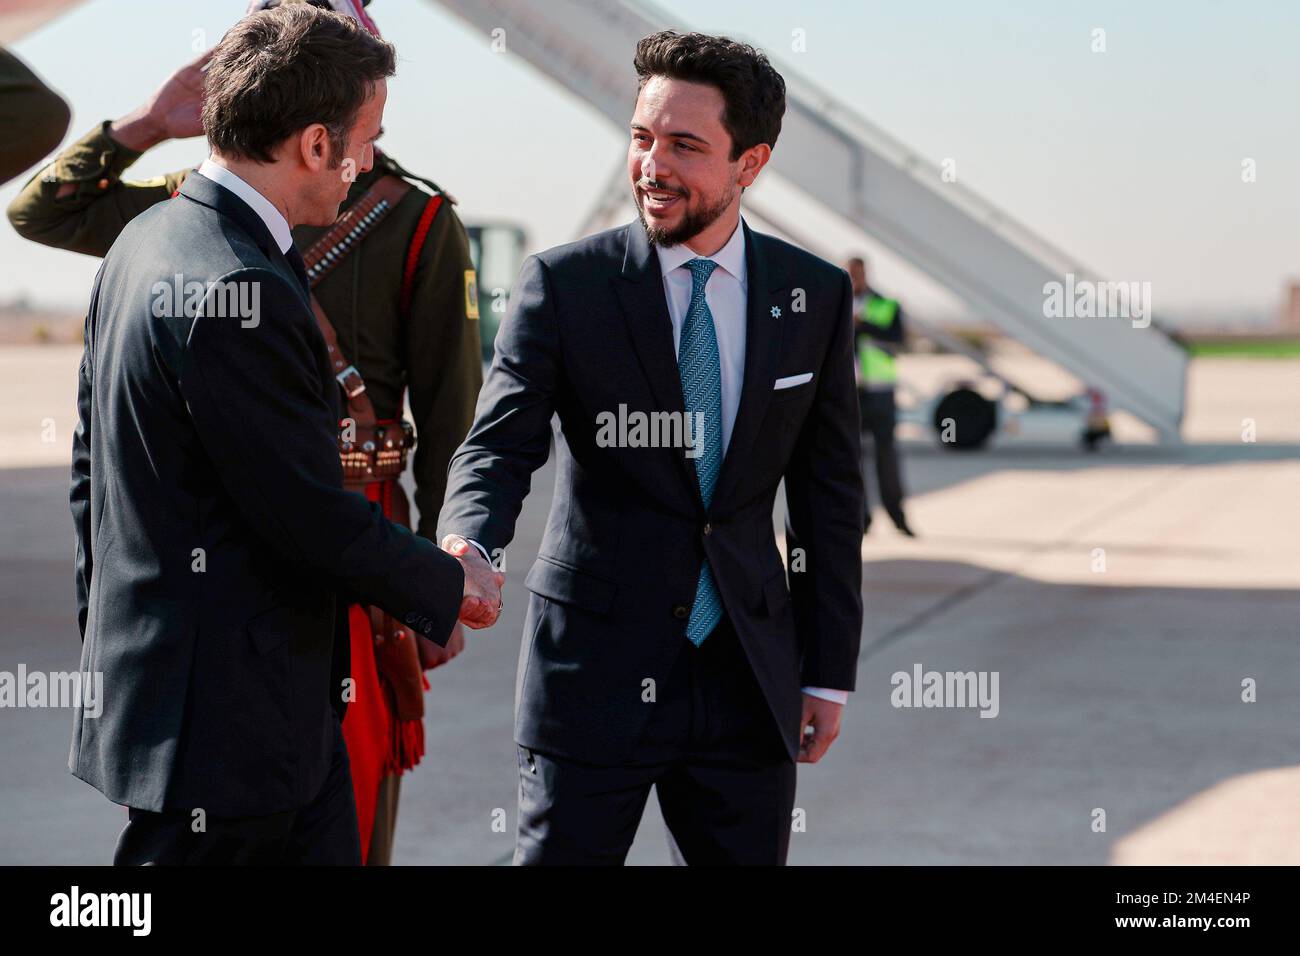 Amman, Jordan. 20th Dec, 2022. France's President Emmanuel Macron (L) is welcomed by the Crown Prince of Jordan Hussein bin Abdullah (R) at Queen Alia International Airport in Amman as he arrives to attend the second Baghdad conference for Cooperation and Partnership in Sweimeh by the Dead Sea shore in central-west Jordan on December 20, 2022. Photo by Royal Hashemite Court/UPI Credit: UPI/Alamy Live News Stock Photo